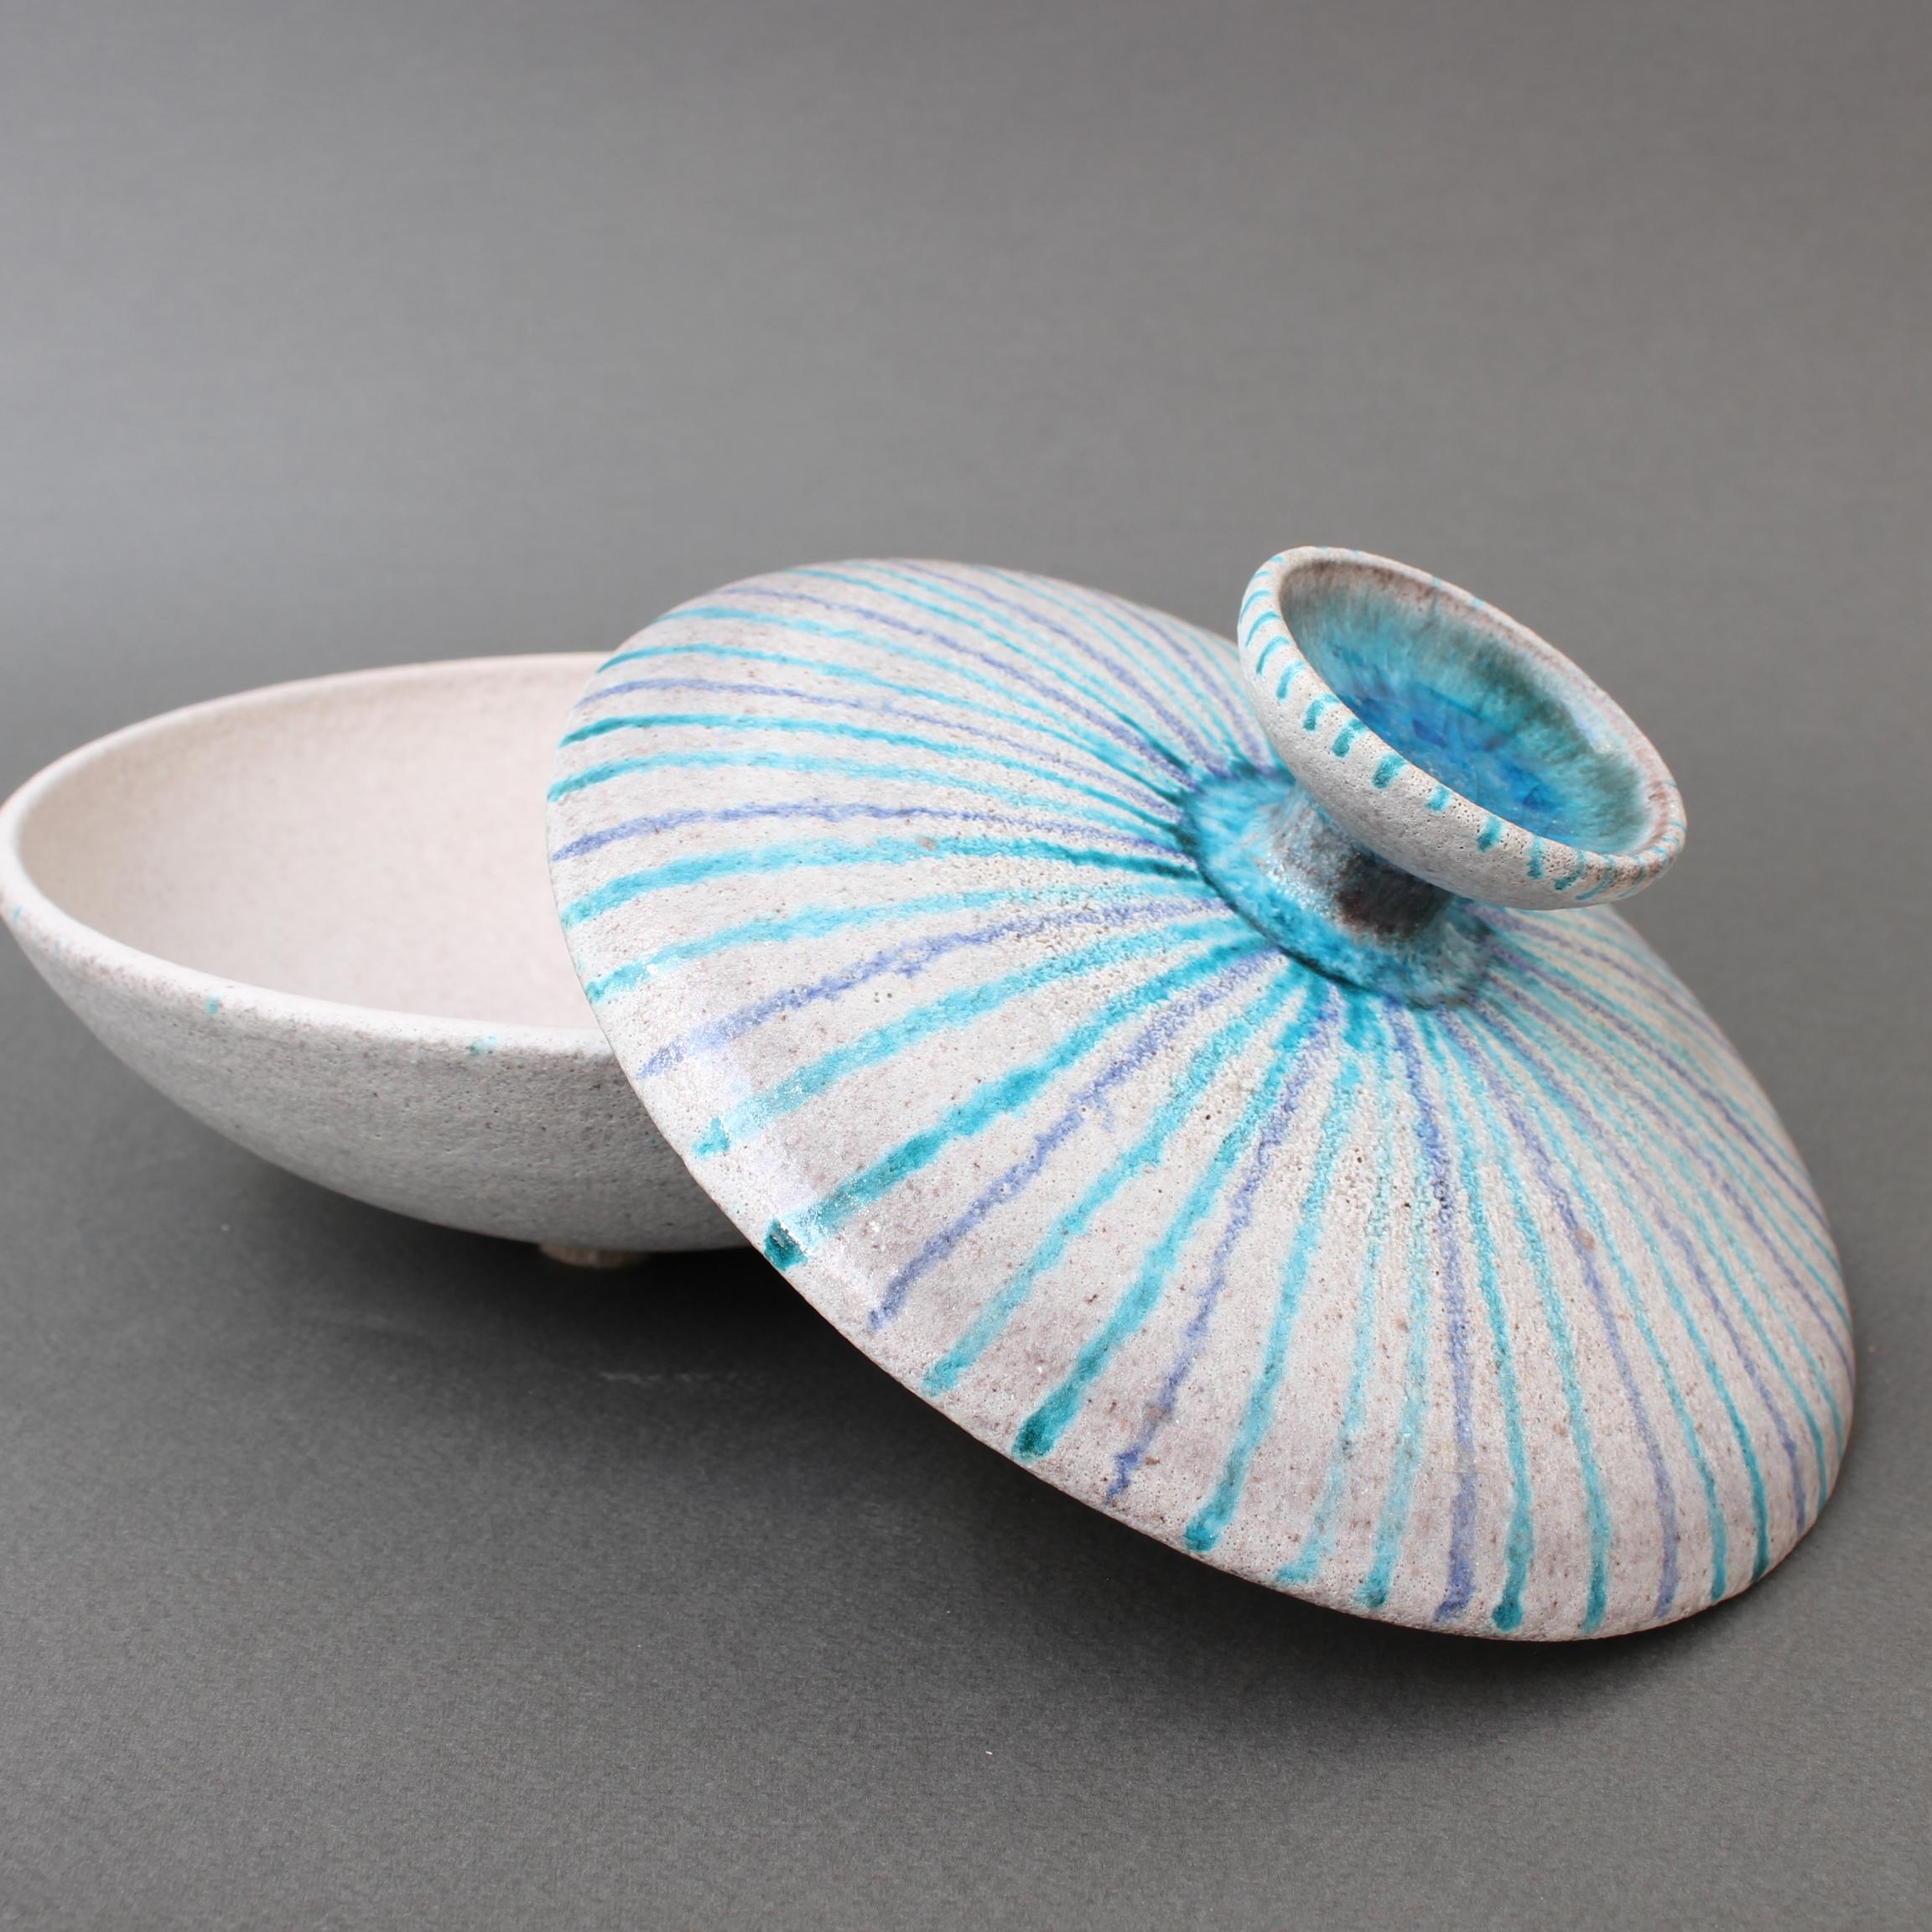 Vintage Italian Ceramic Candy Dish by Guido Gambone, circa 1950s For Sale 10